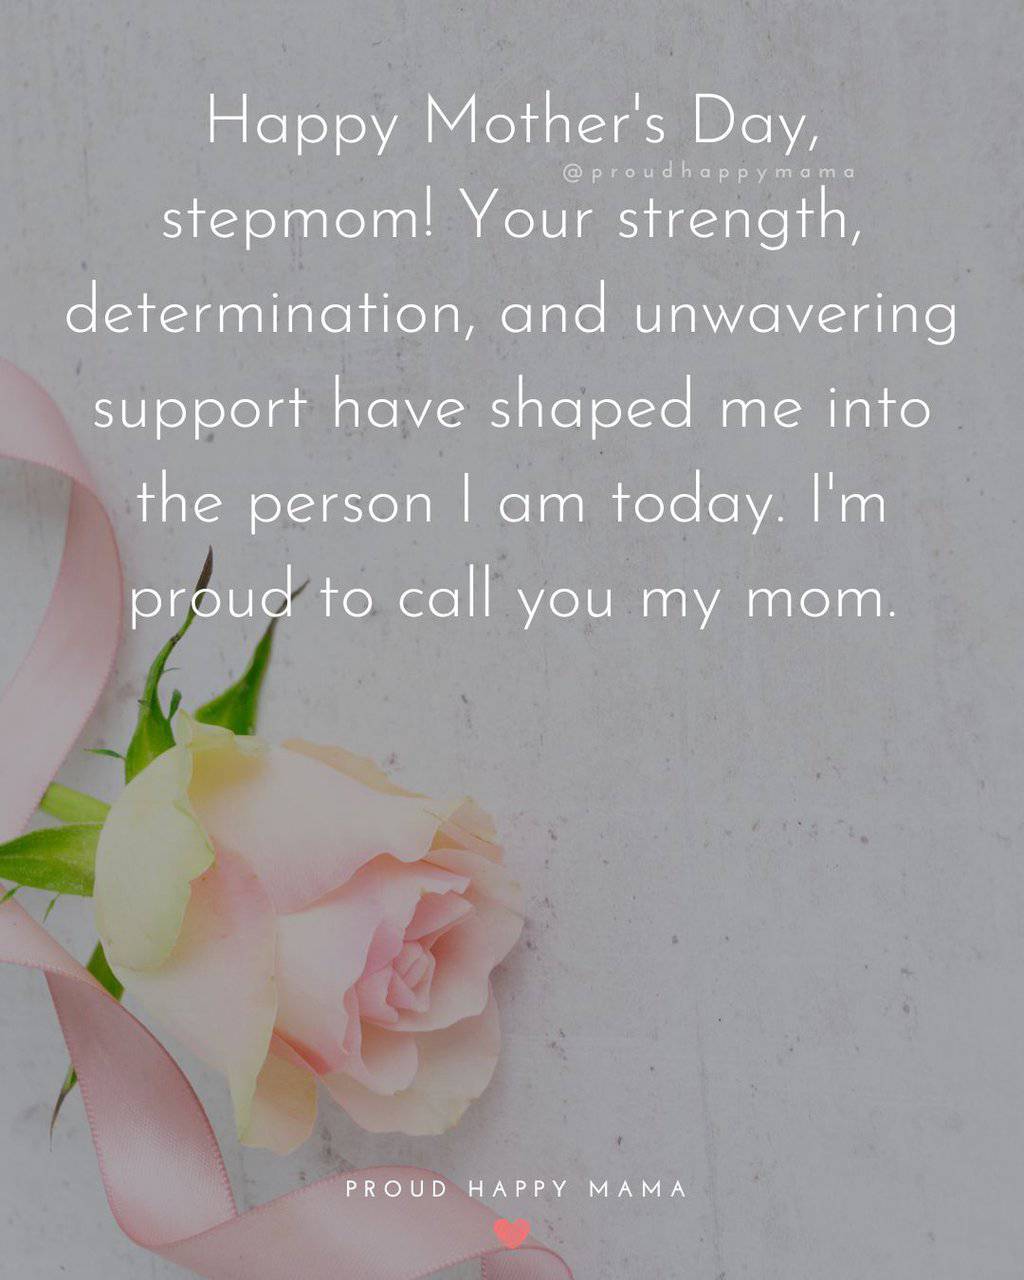 inspirational Mother's day quotes for stepmom